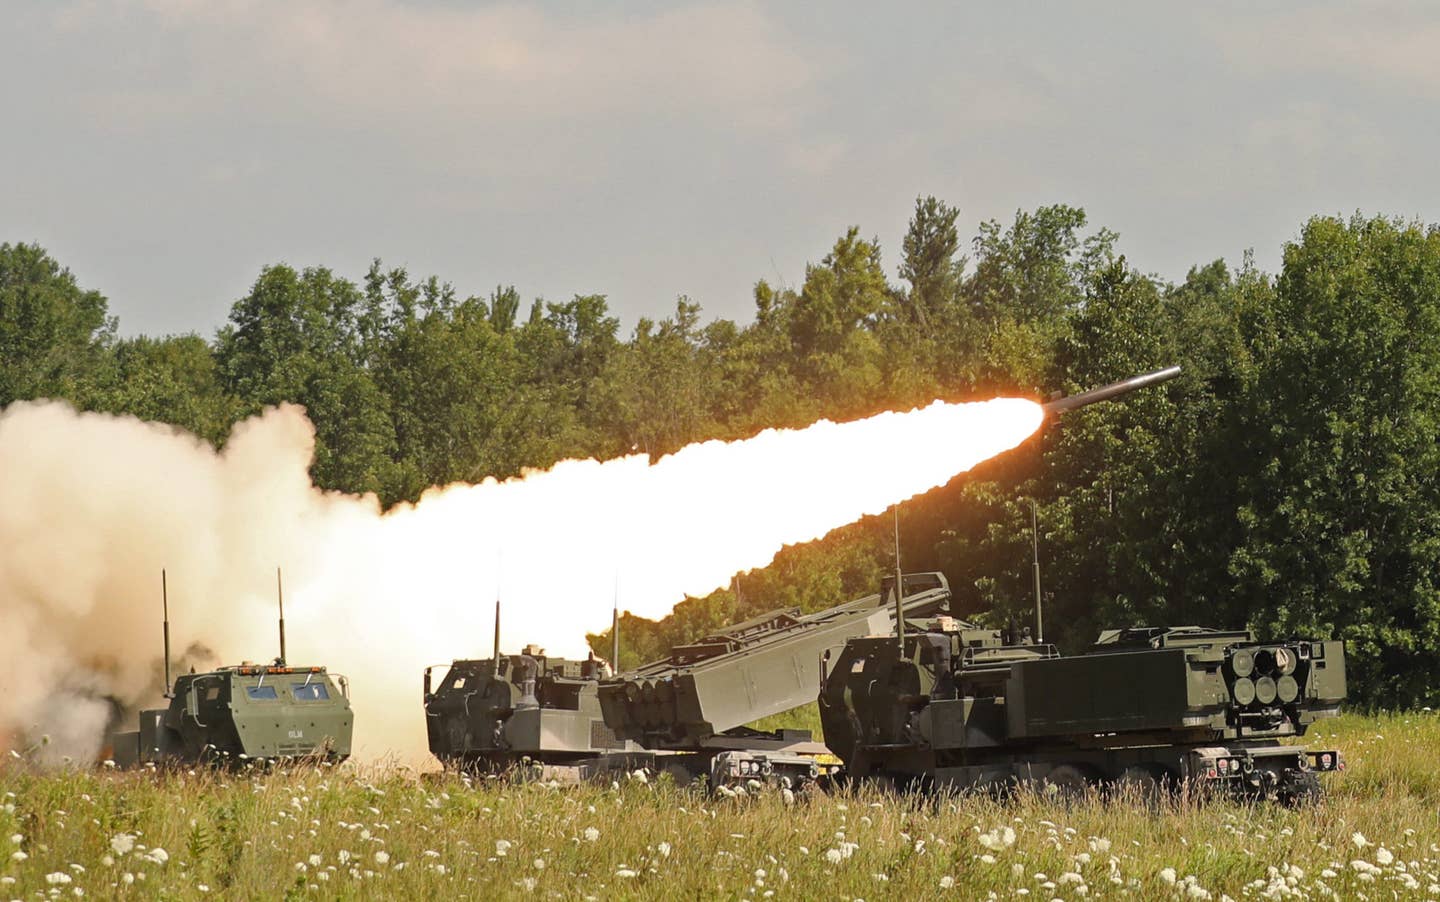 U.S. Army HIMARS fire rockets at Fort Drum, New York, in August. <em>U.S. Army Photo by Sgt. 1st Class Richard Frost</em>